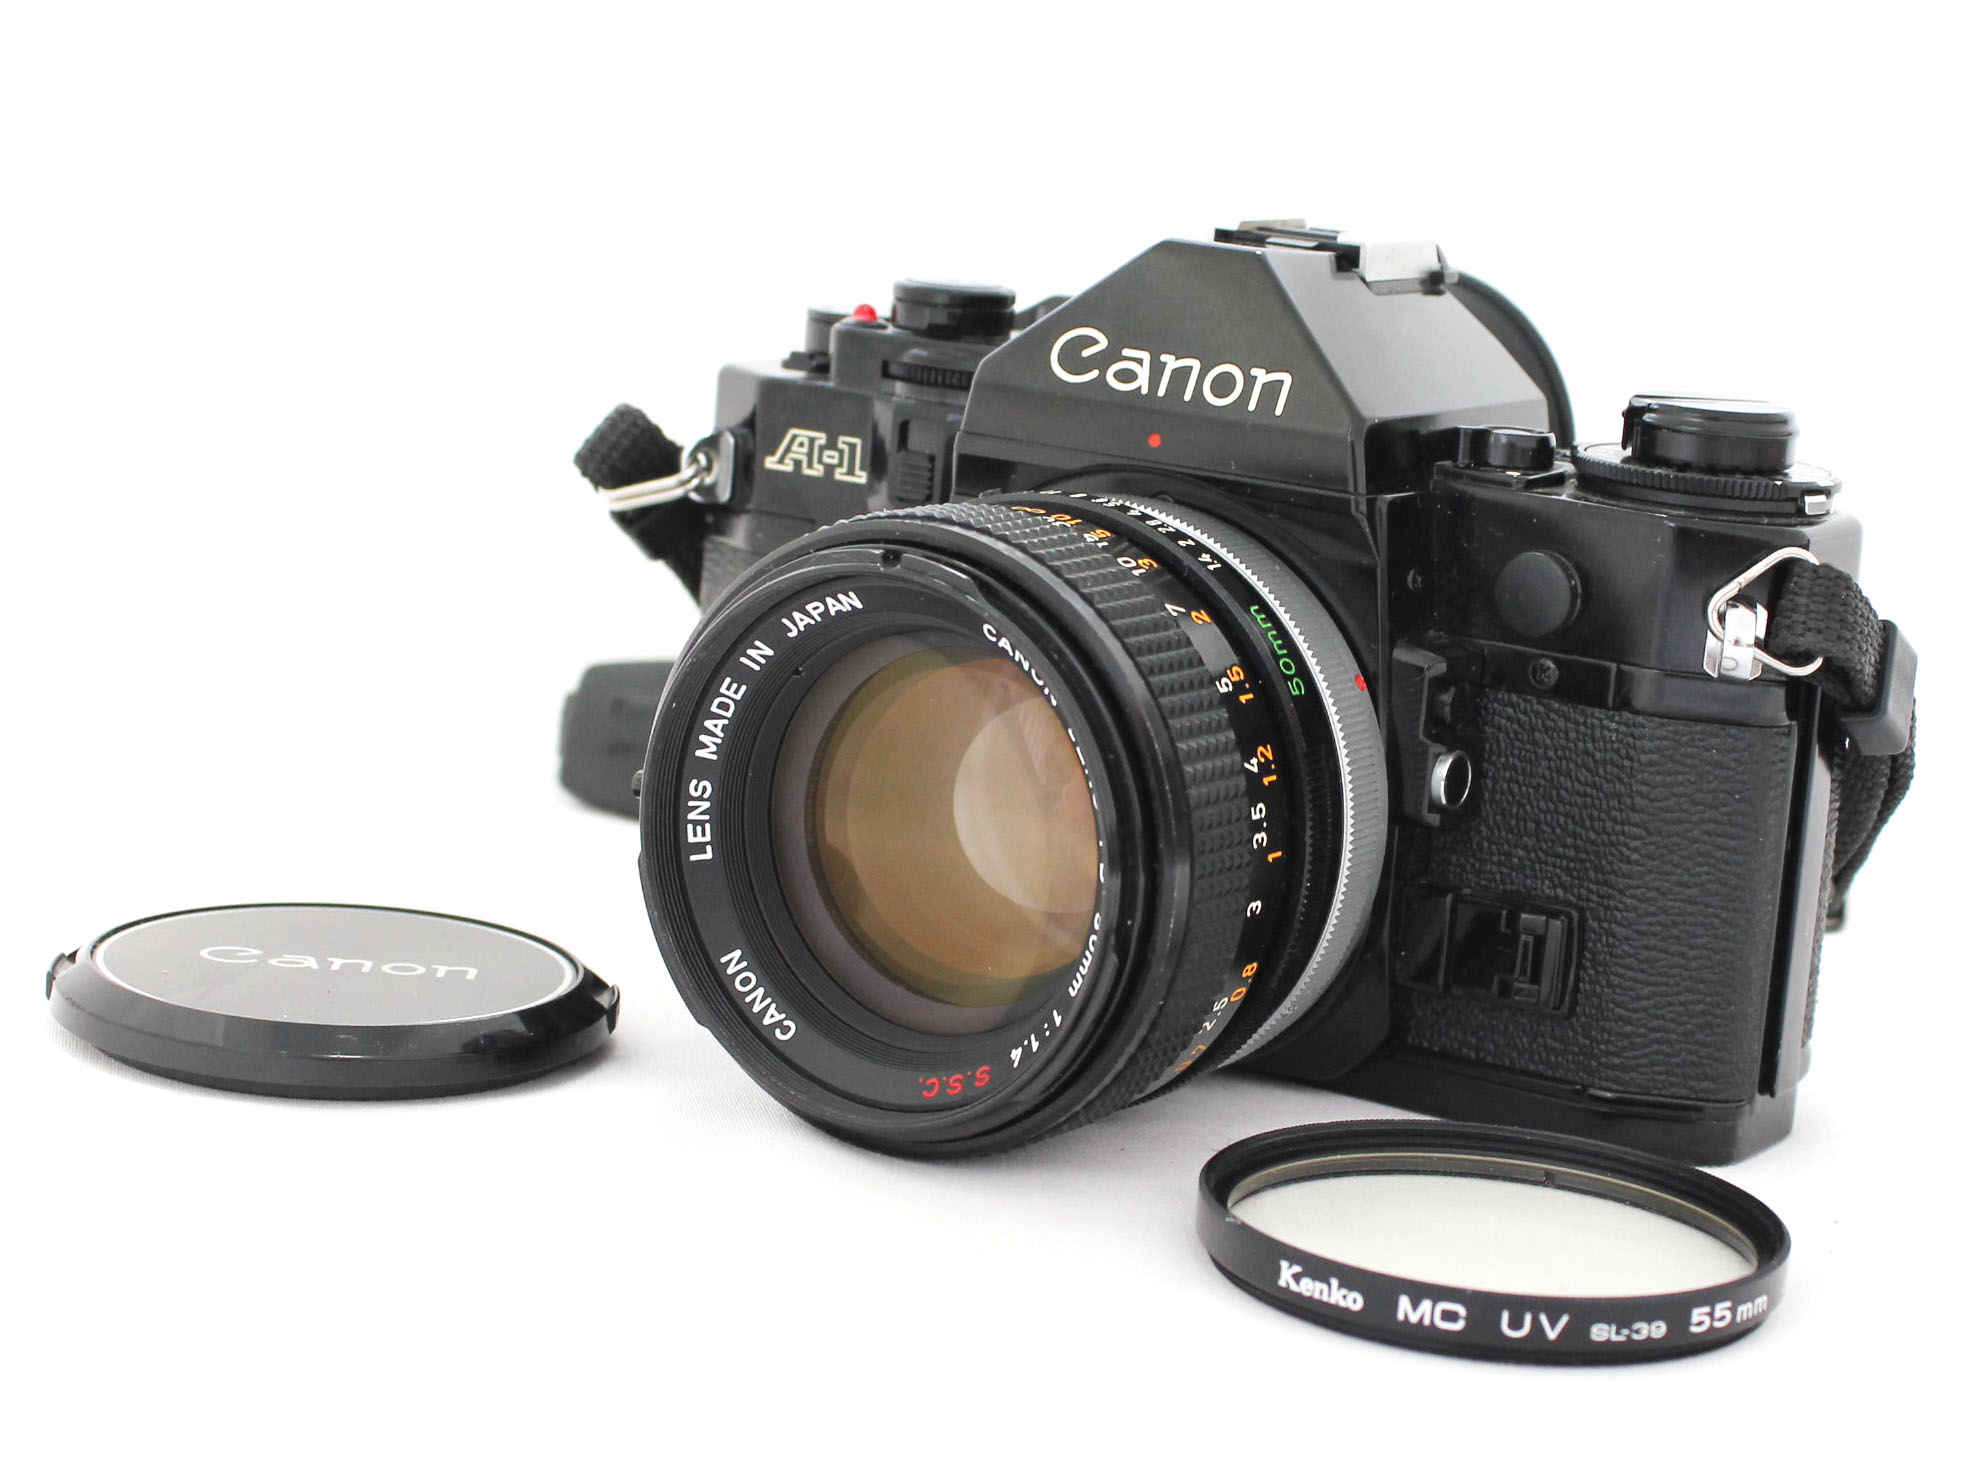 [Excellent++++] Canon A-1 35mm SLR Film Camera with FD 50mm F/1.4 S.S.C. Lens from Japan